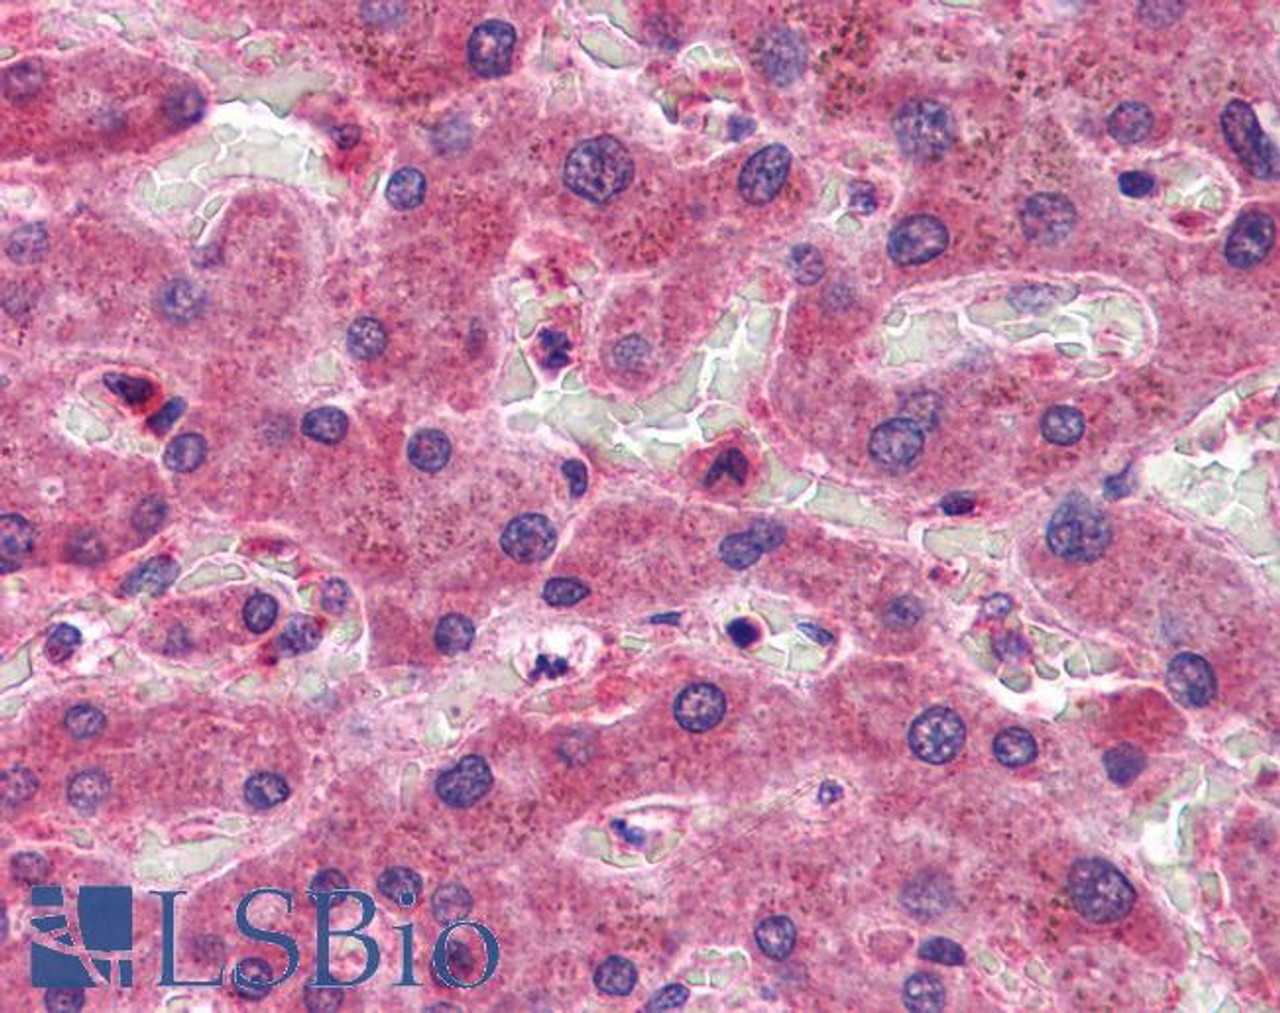 45-989 (3.75ug/ml) staining of paraffin embedded Human Skeletal Muscle. Steamed antigen retrieval with citrate buffer pH 6, AP-staining.